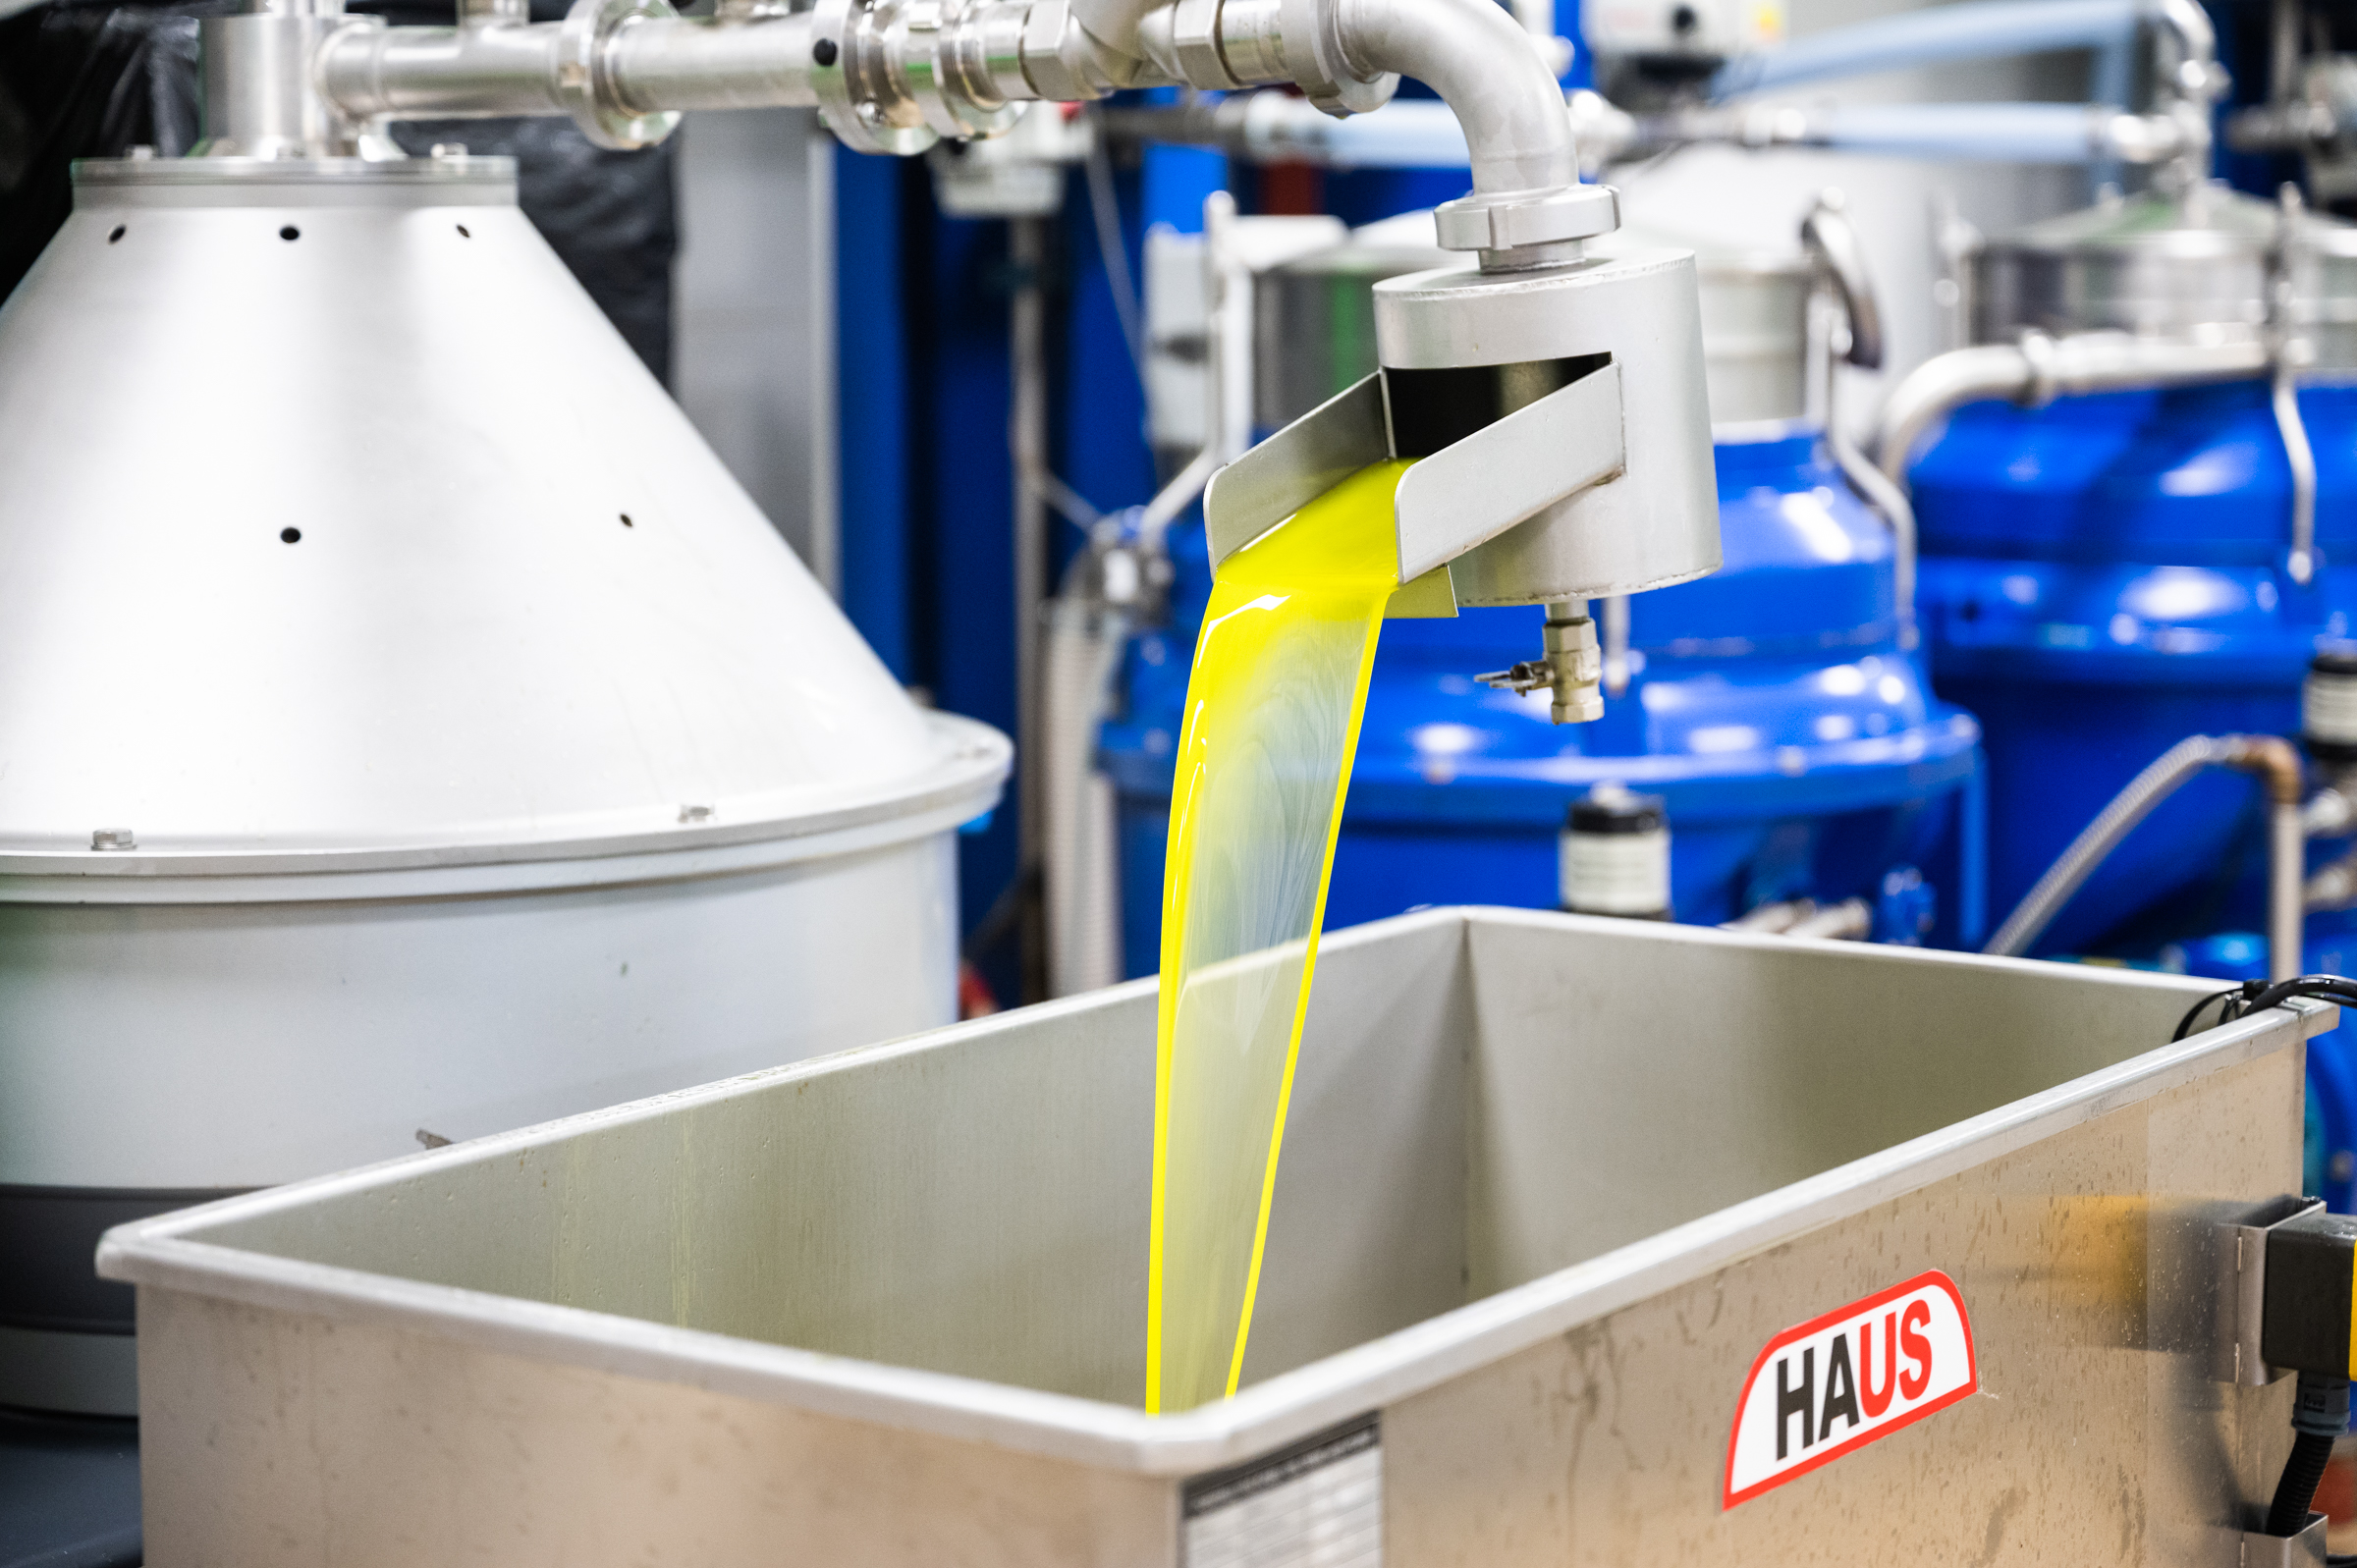 Once separated from solids and water, the olive oil is filtered for bottling